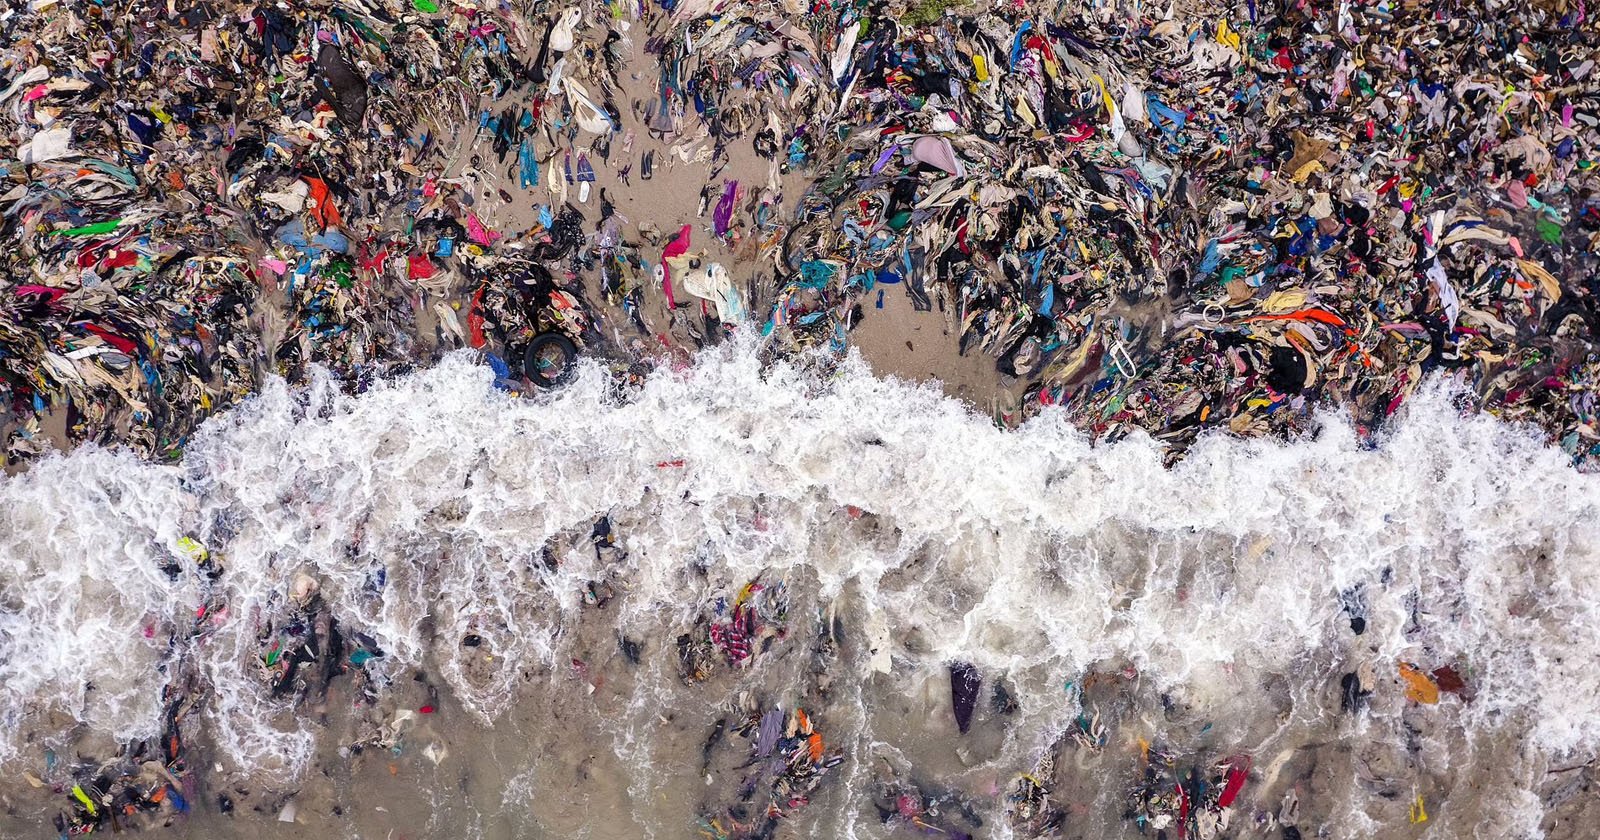 Shocking Photos Show Western ‘Fast Fashion’ That Pollute African Beaches